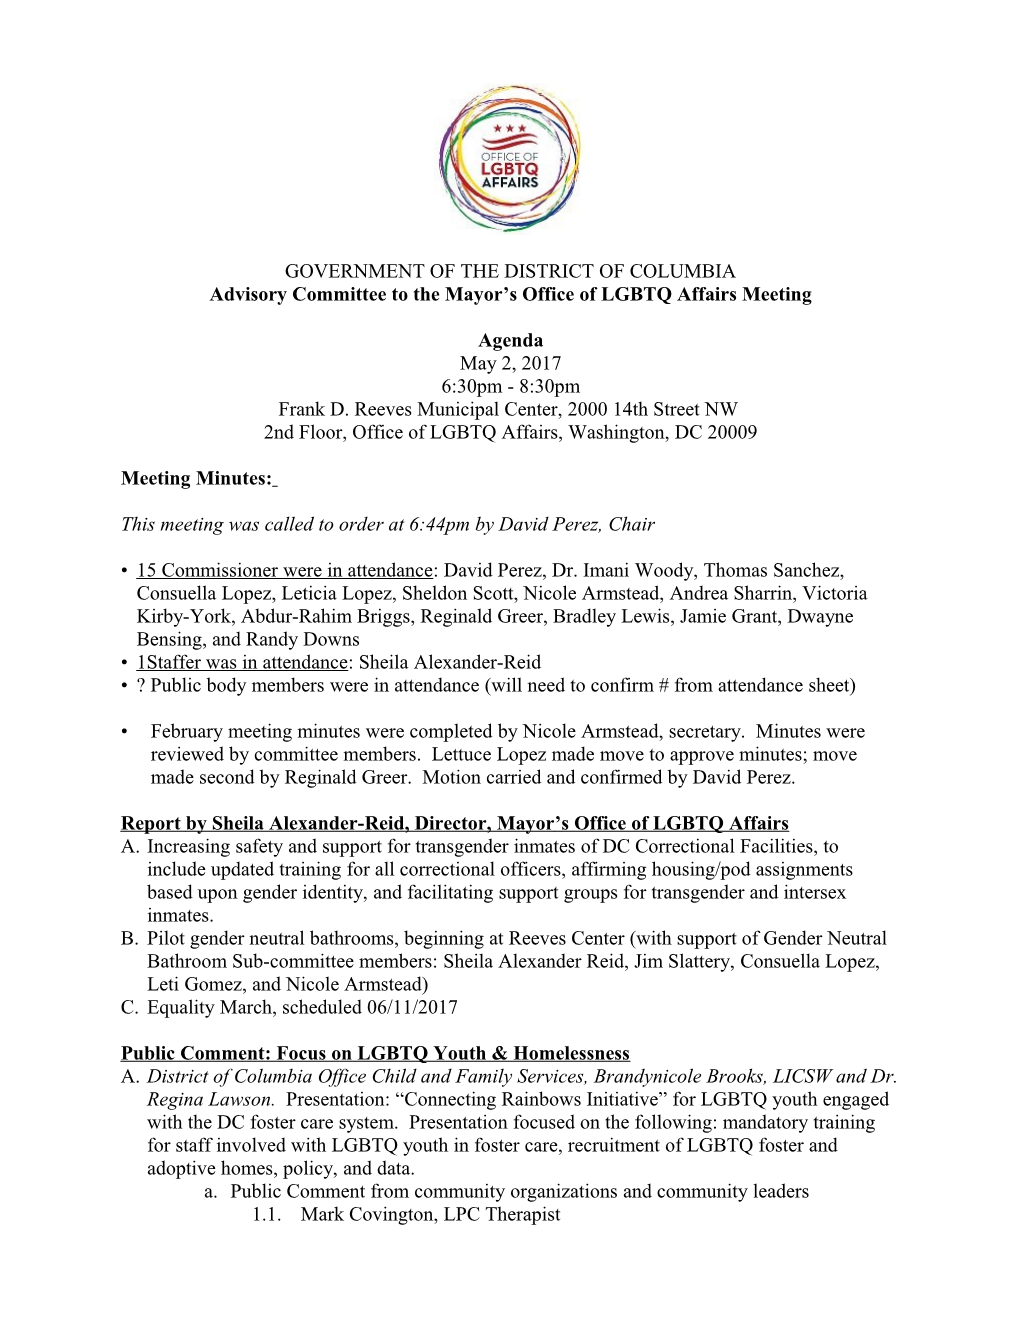 Advisory Committee to the Mayor S Office of LGBTQ Affairs Meeting